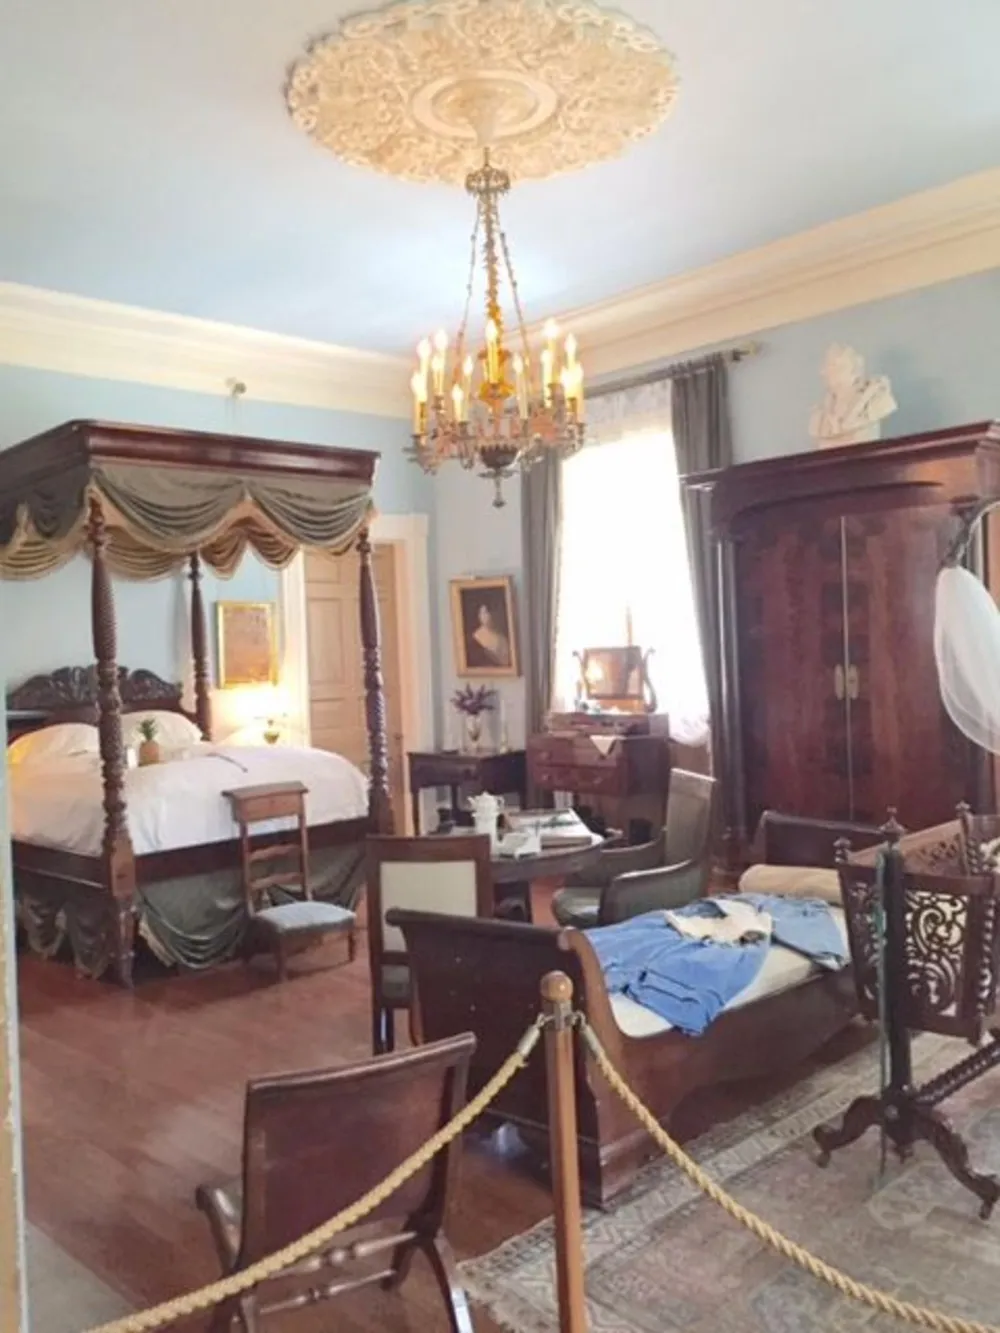 The image shows a Victorian-style bedroom with antique furniture ornate decorations and is cordoned off suggesting it might be part of a museum or historic home tour